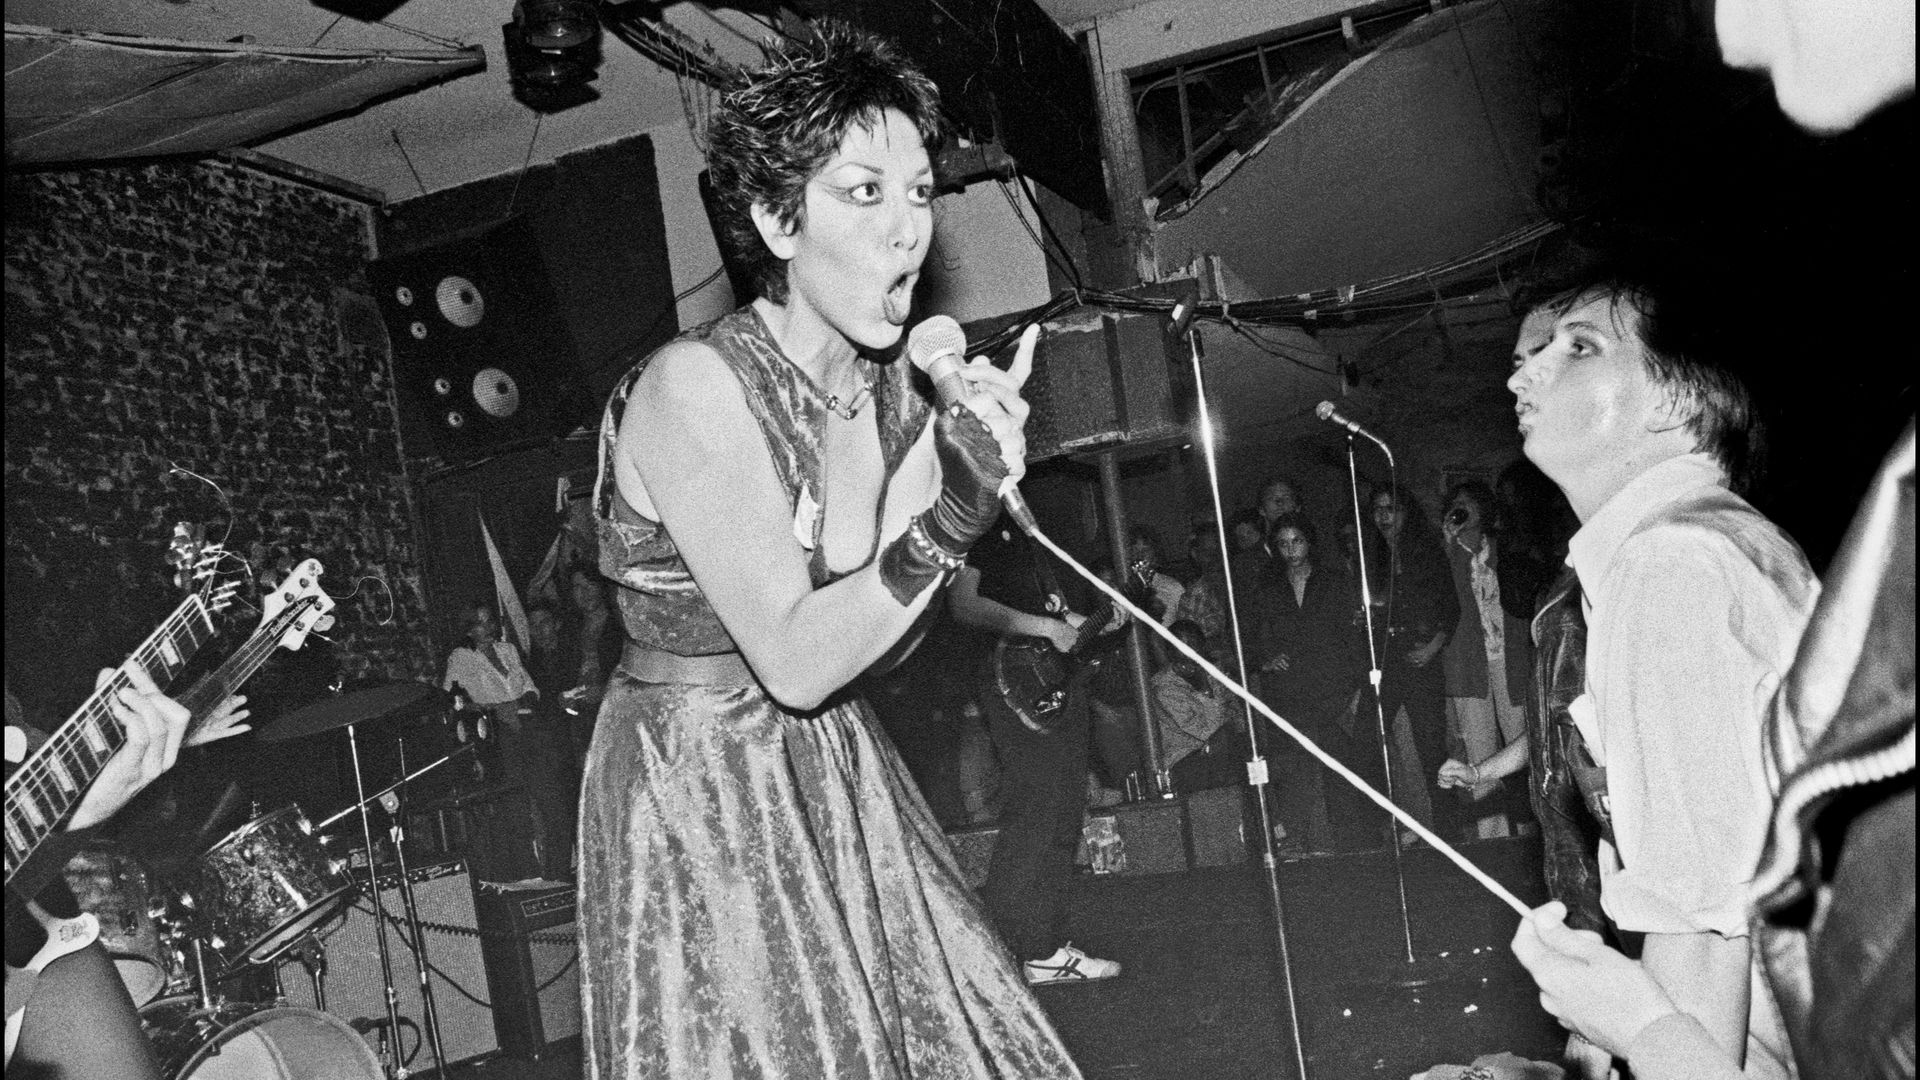 Photo of Alice Bag singing into a microphone while a band players behind her and people watch from below the stage